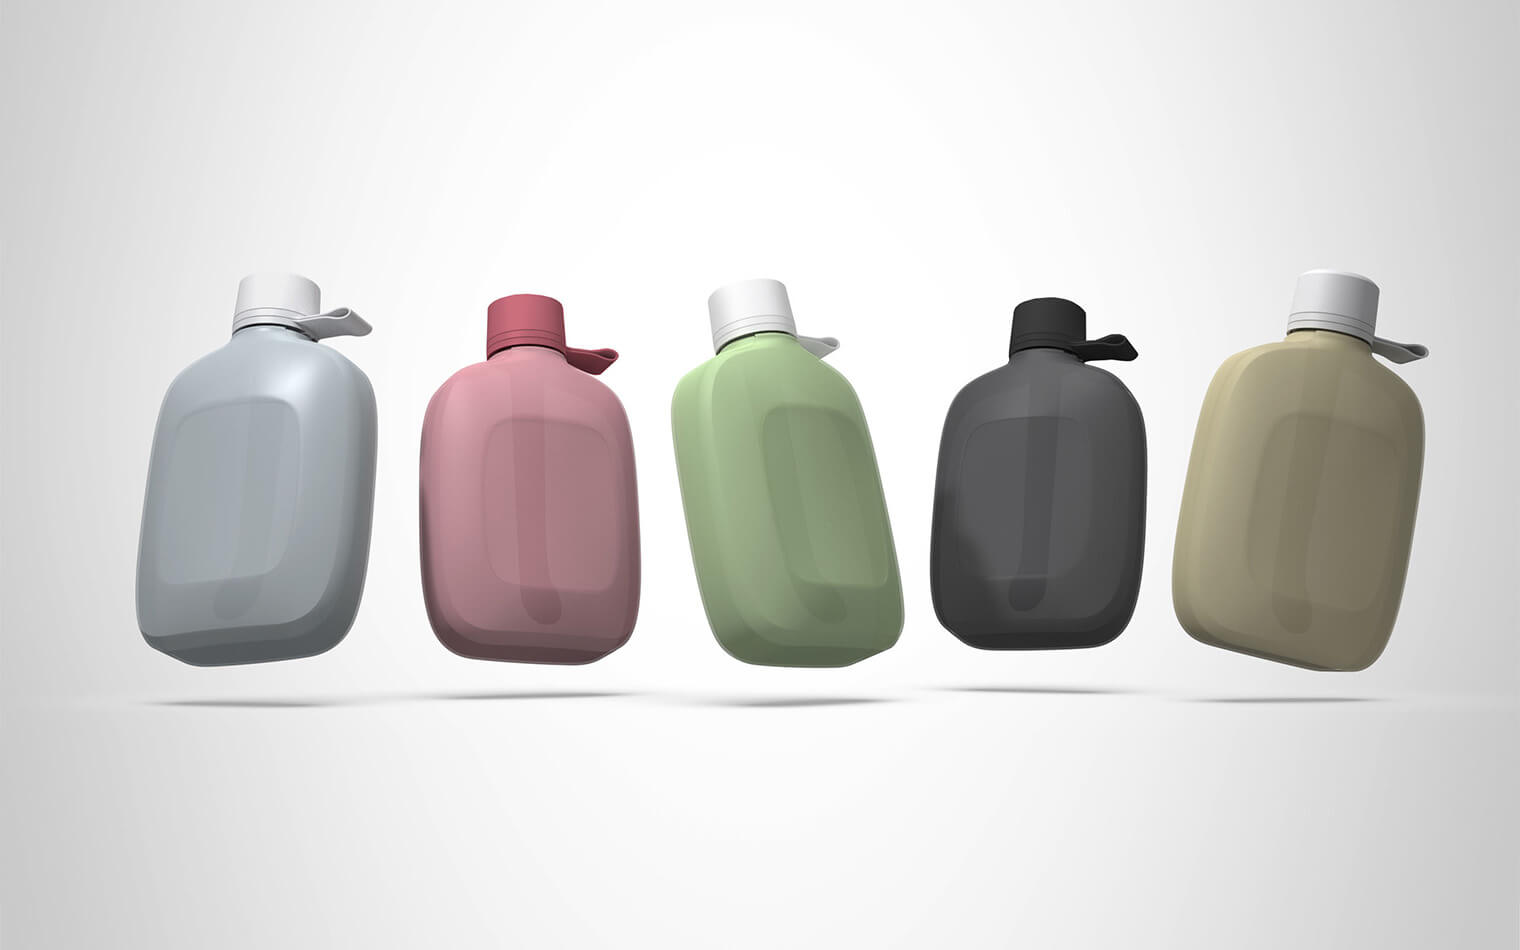 Five color variants of mobile bidet Purpo: gray, red, green, black and yellow.